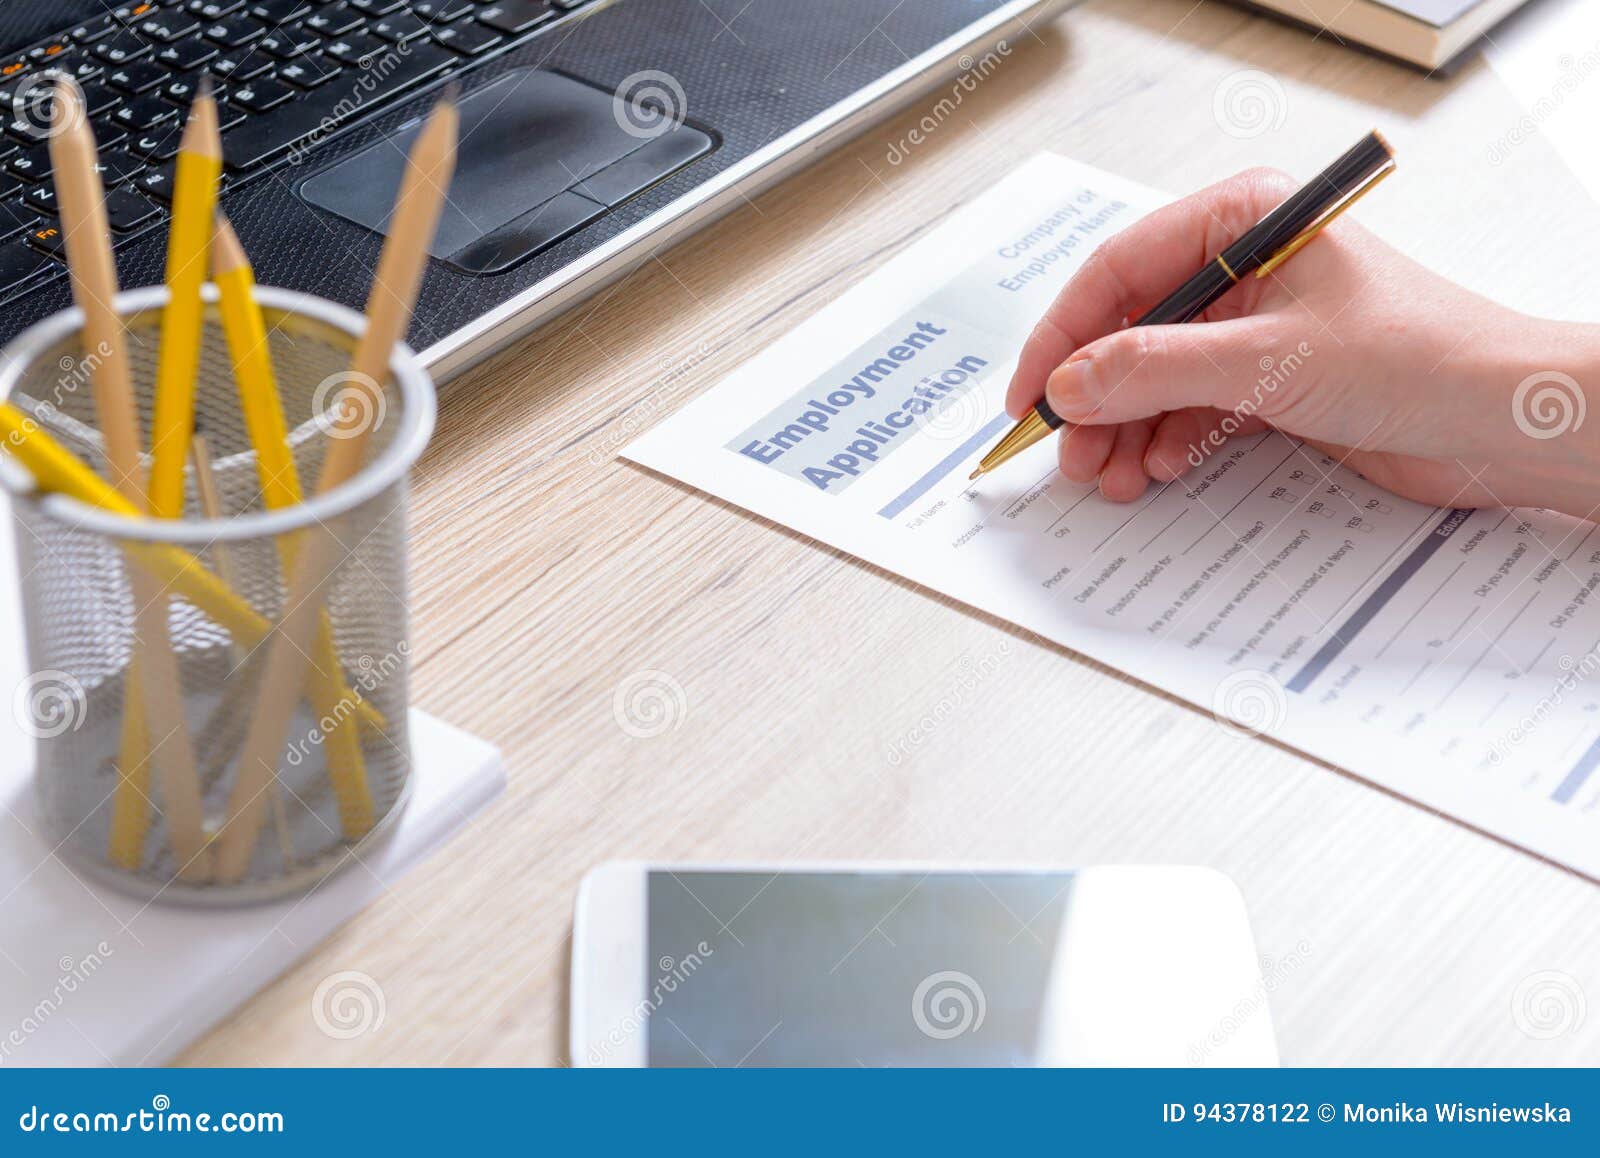 Filling in Blank Employment Application Form Stock Photo - Image of ...